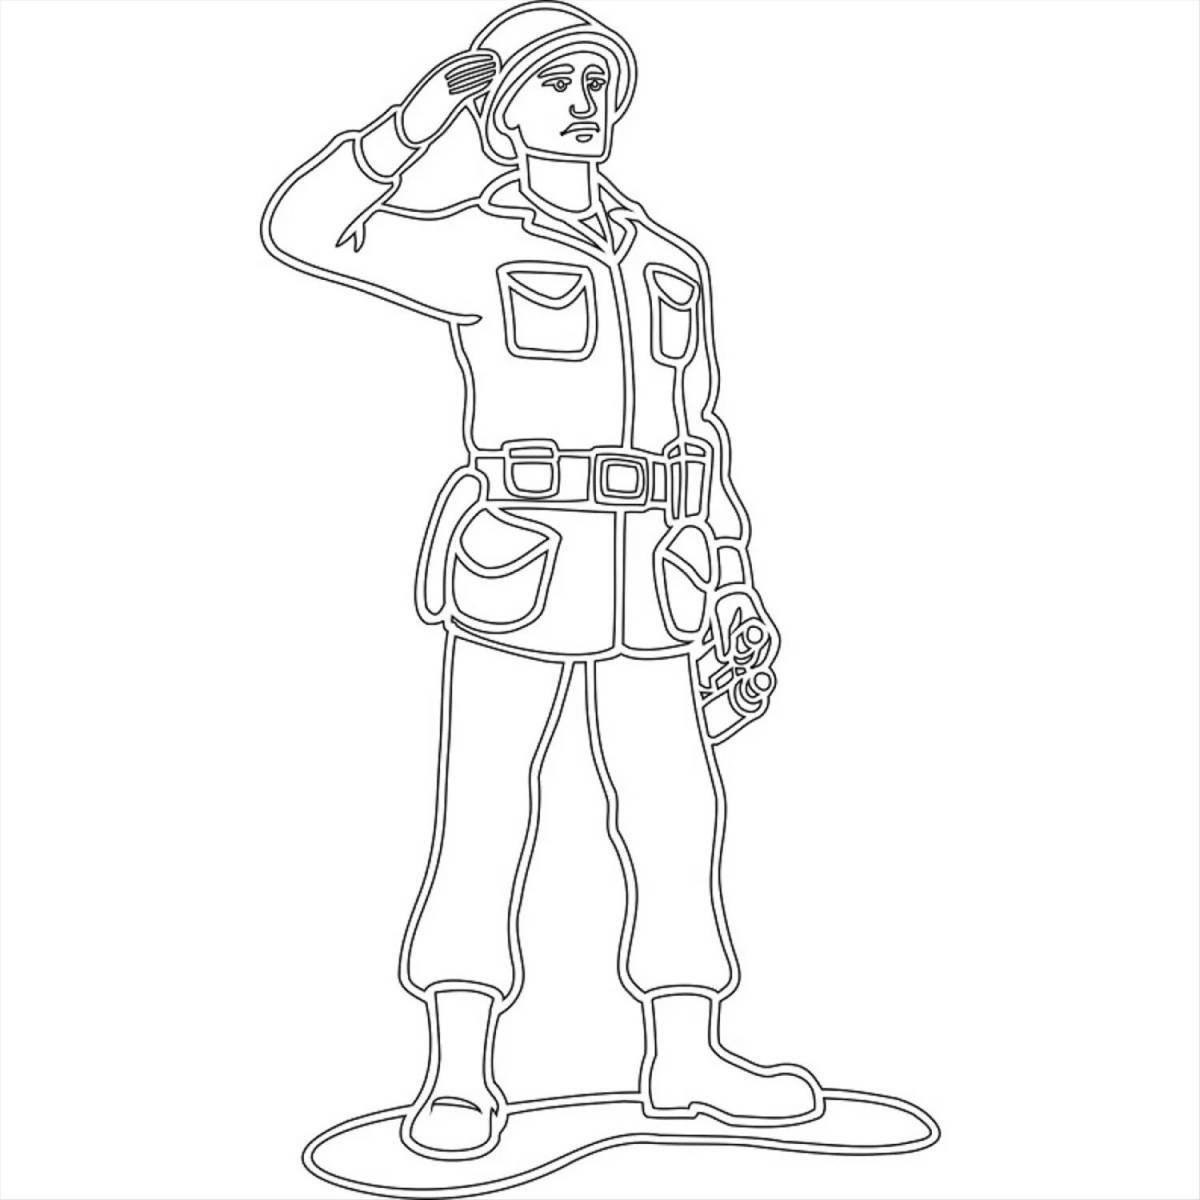 Playful tin soldier coloring page